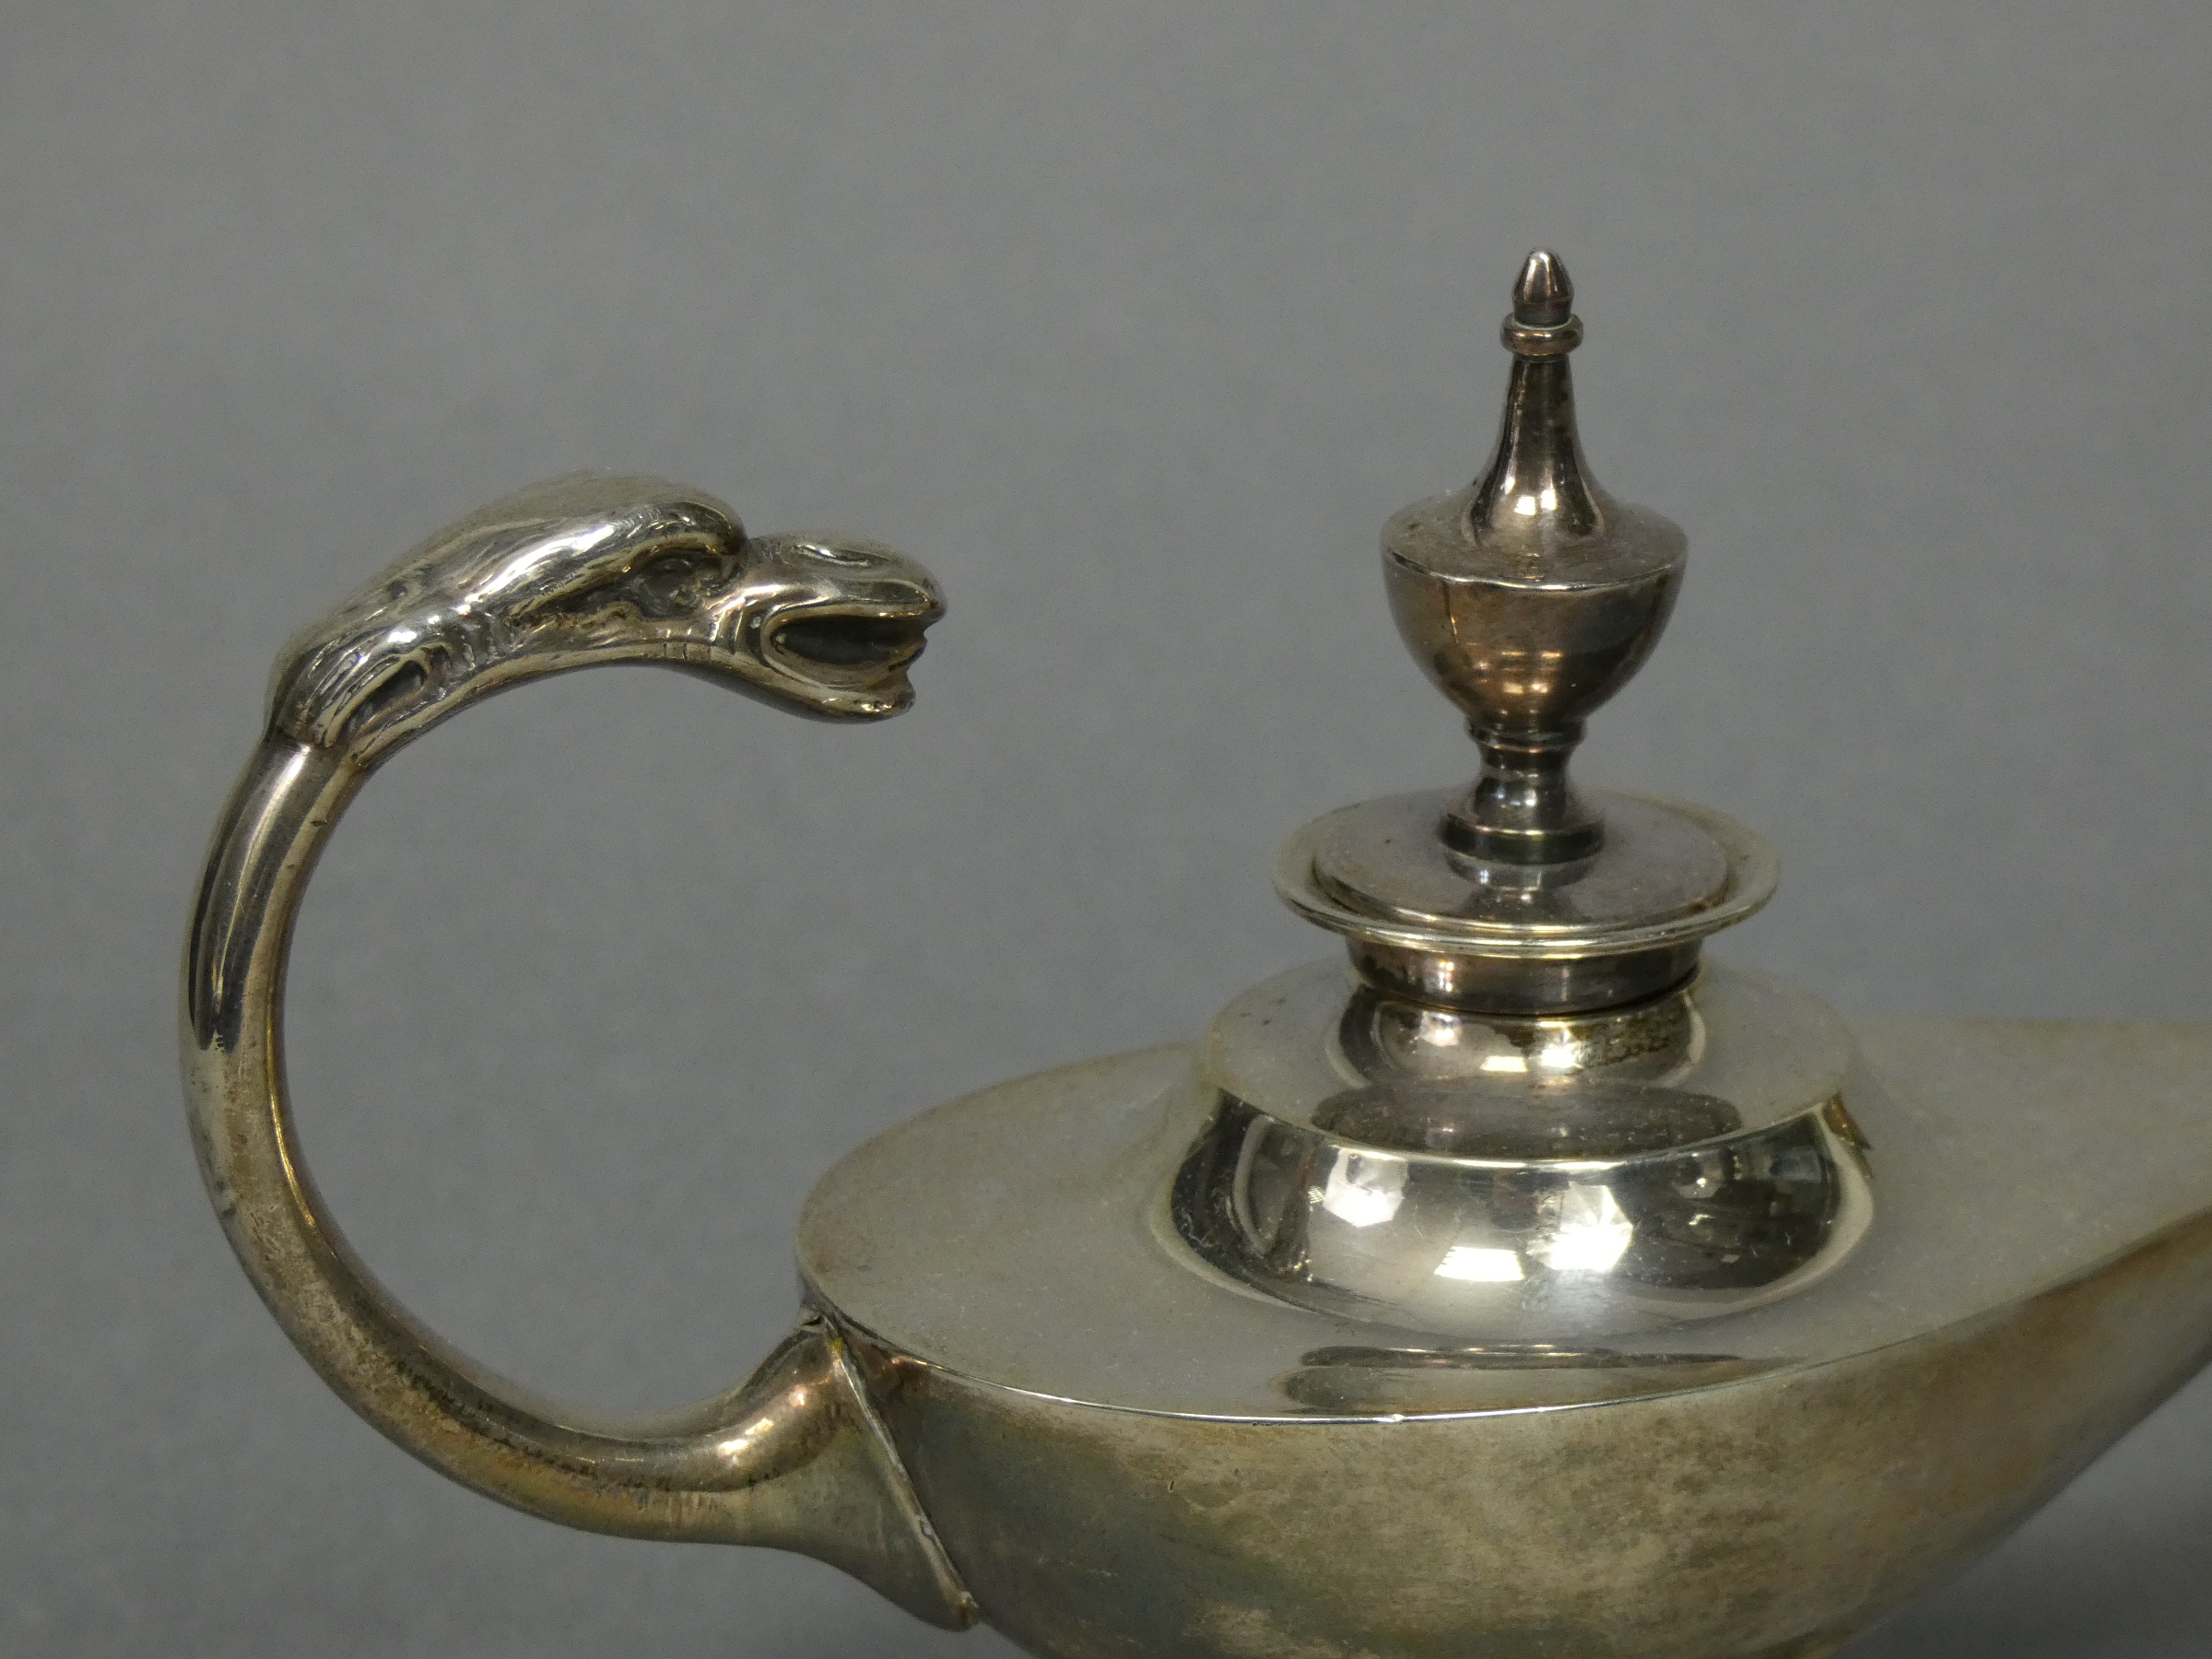 An Edwardian silver table cigar lighter in the form of a roman oil lamp with urn finial & mythical - Image 3 of 4